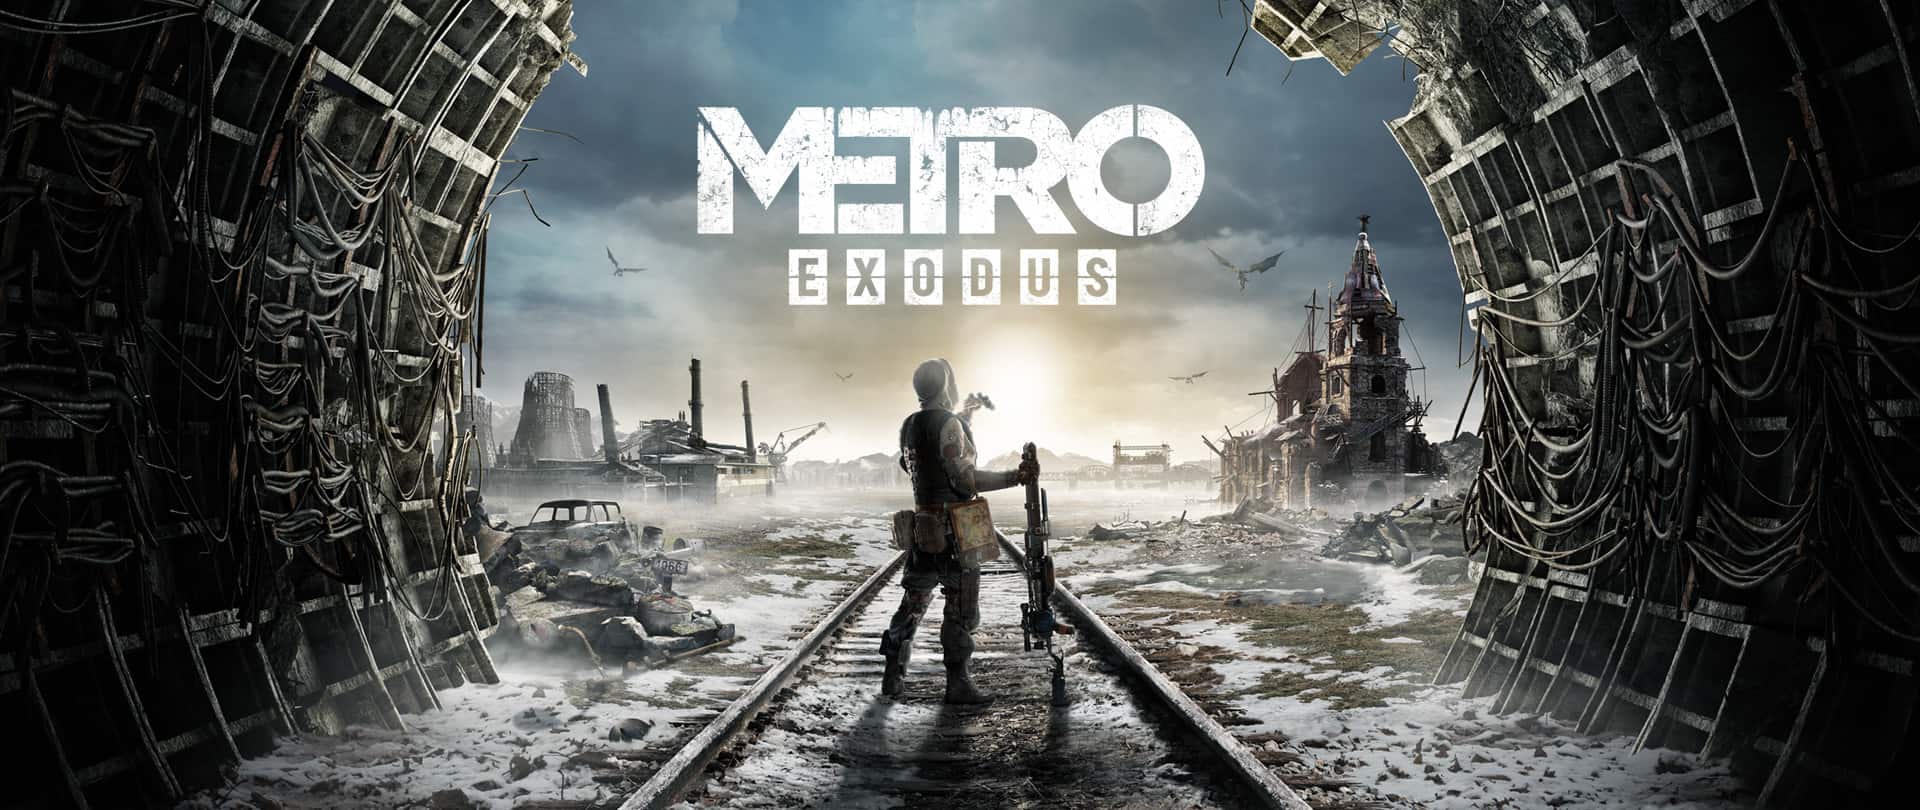 Metro Exodus 2020 Crack Game For PC And Latest Version Download